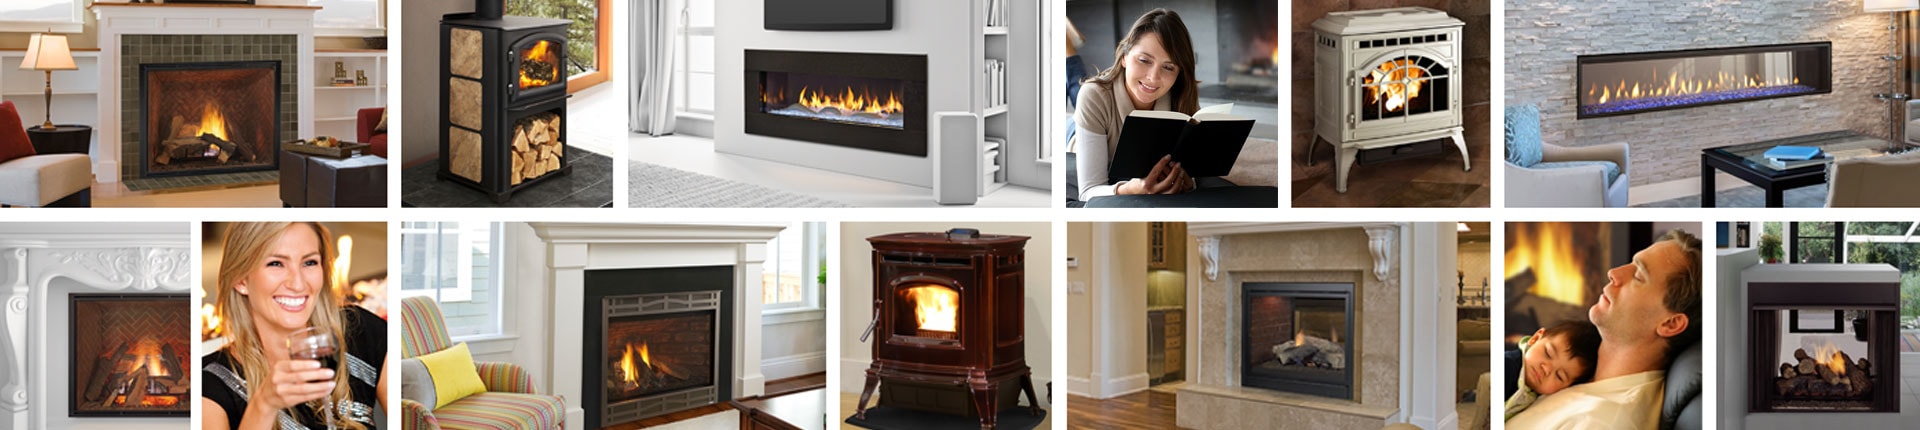 Heat and Glo Fireplace Review Unique Hearth & Home Technologies